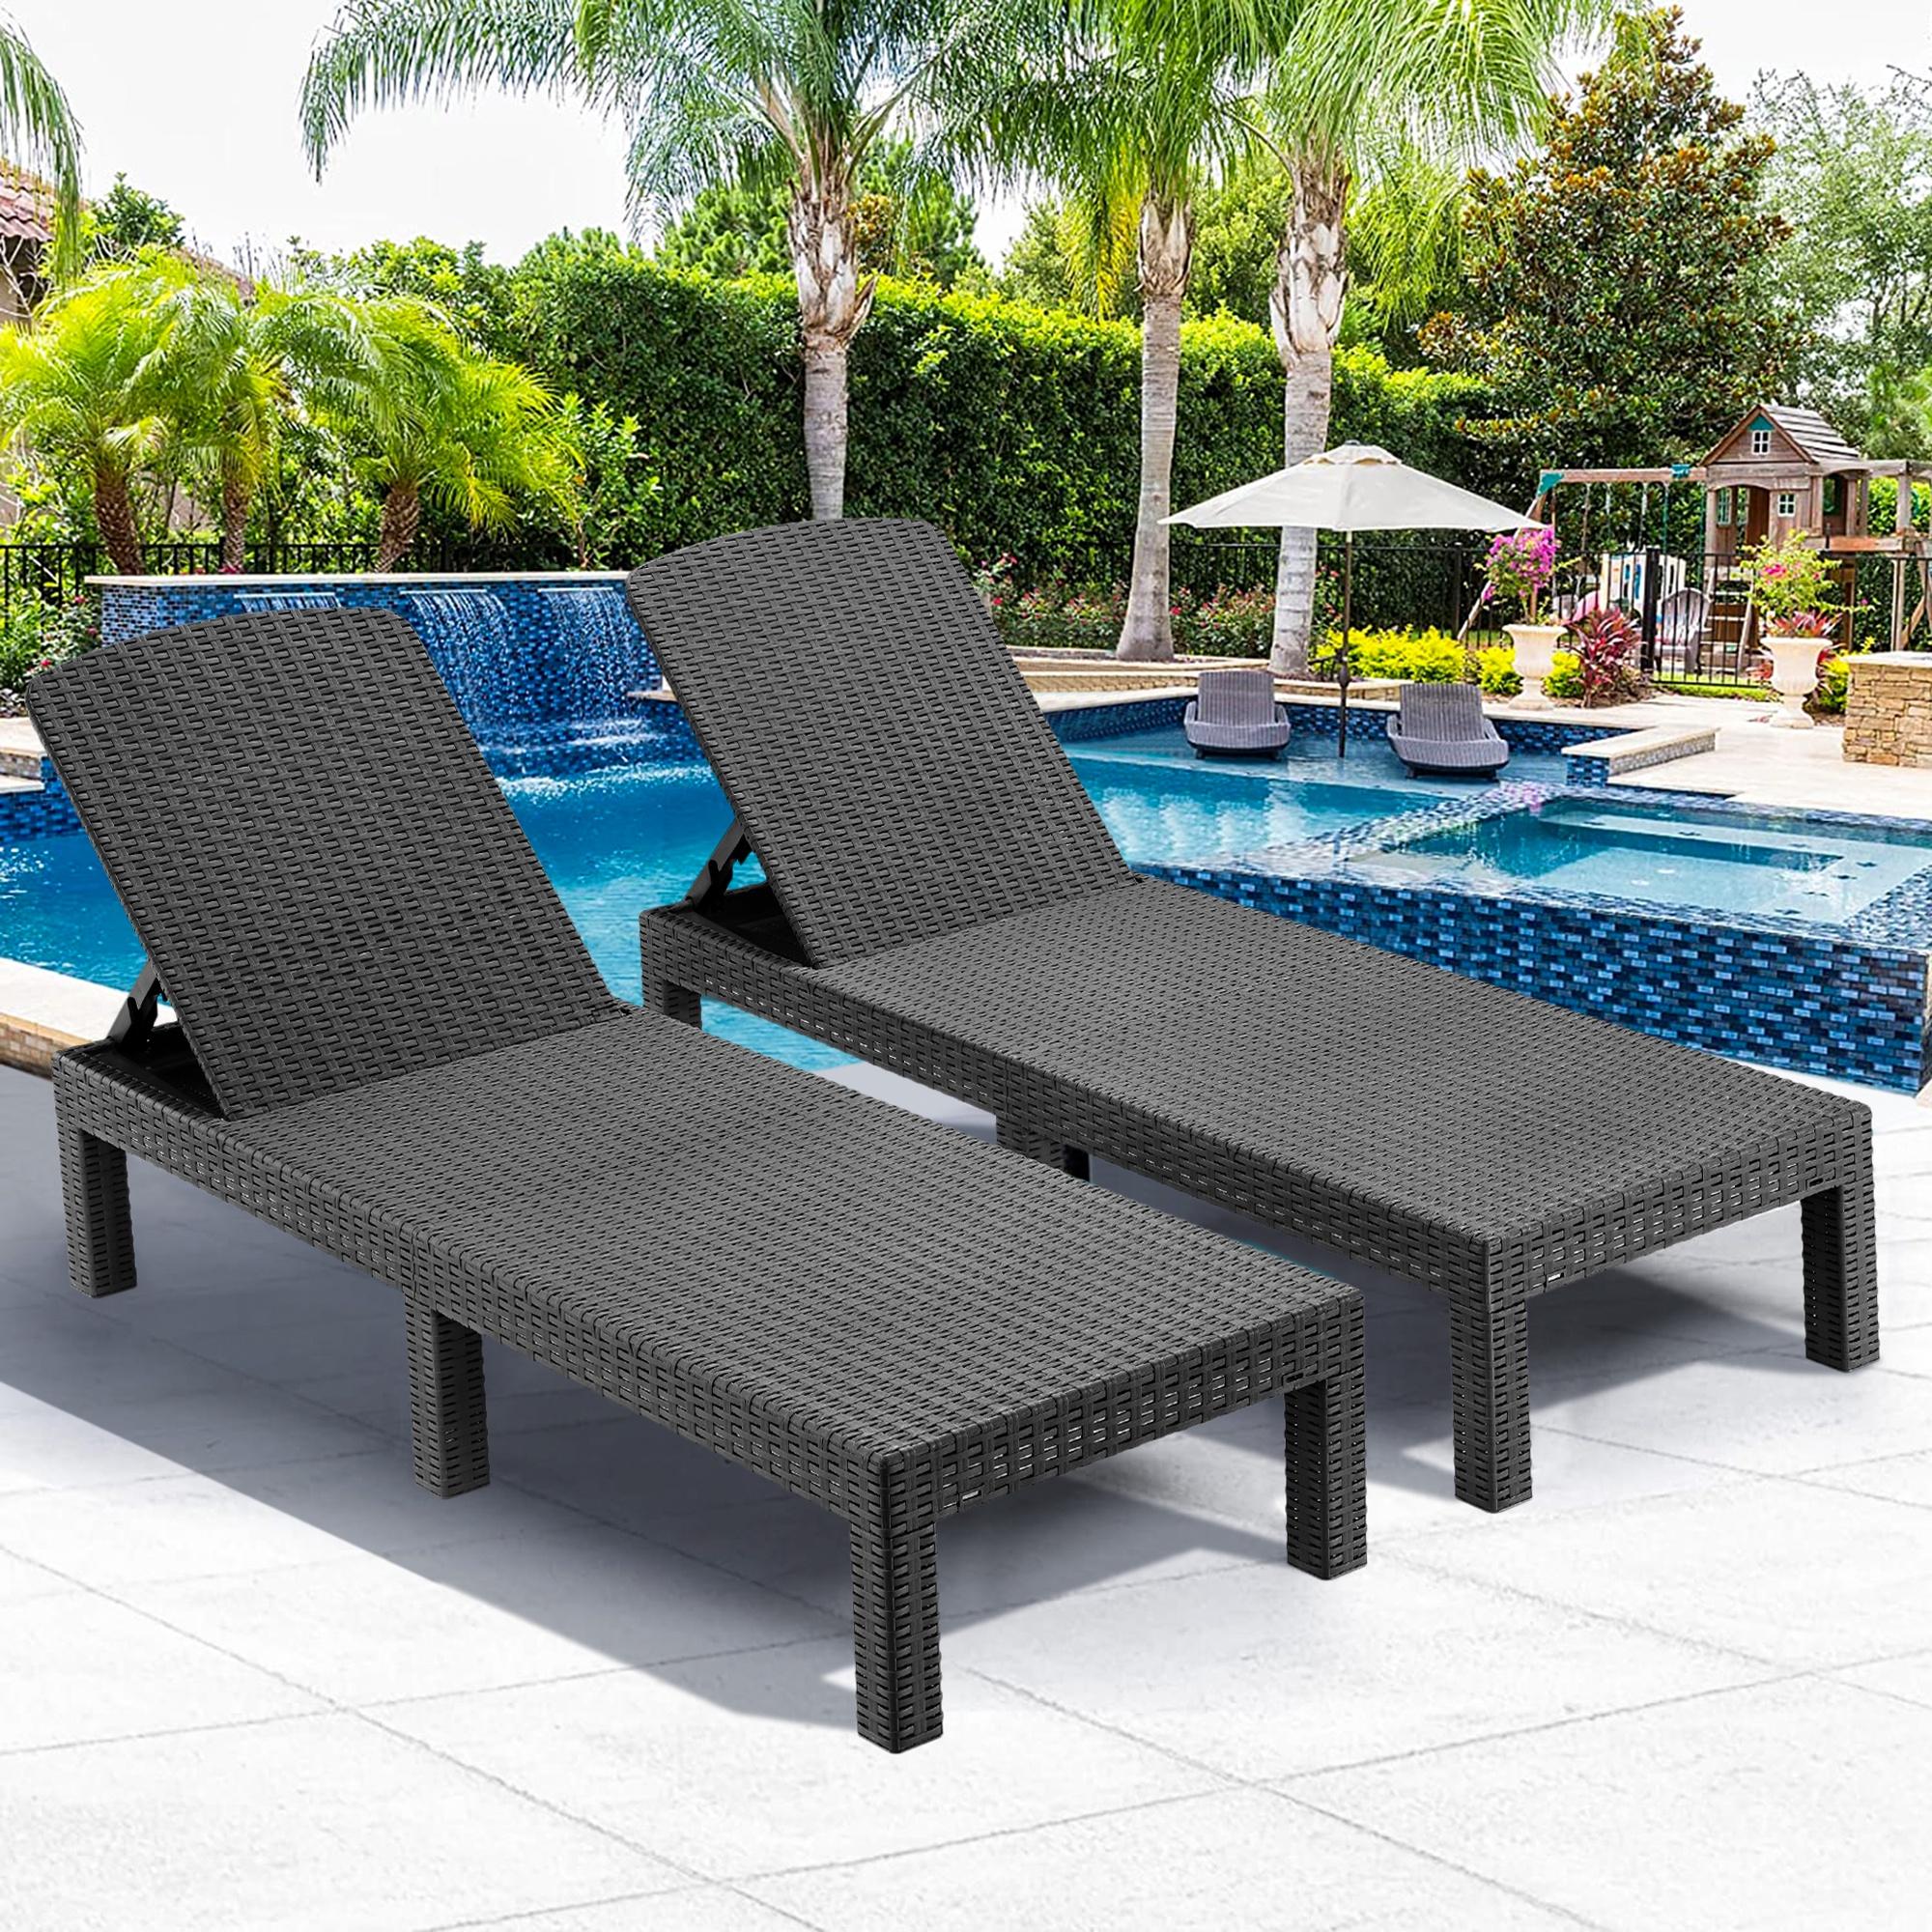 Chaise Lounge Set of 2, Patio Reclining Lounge Chairs with Adjustable Backrest, Outdoor All-Weather PP Resin Sun Loungers for Backyard, Poolside, Porch, Garden, Gray - image 2 of 10